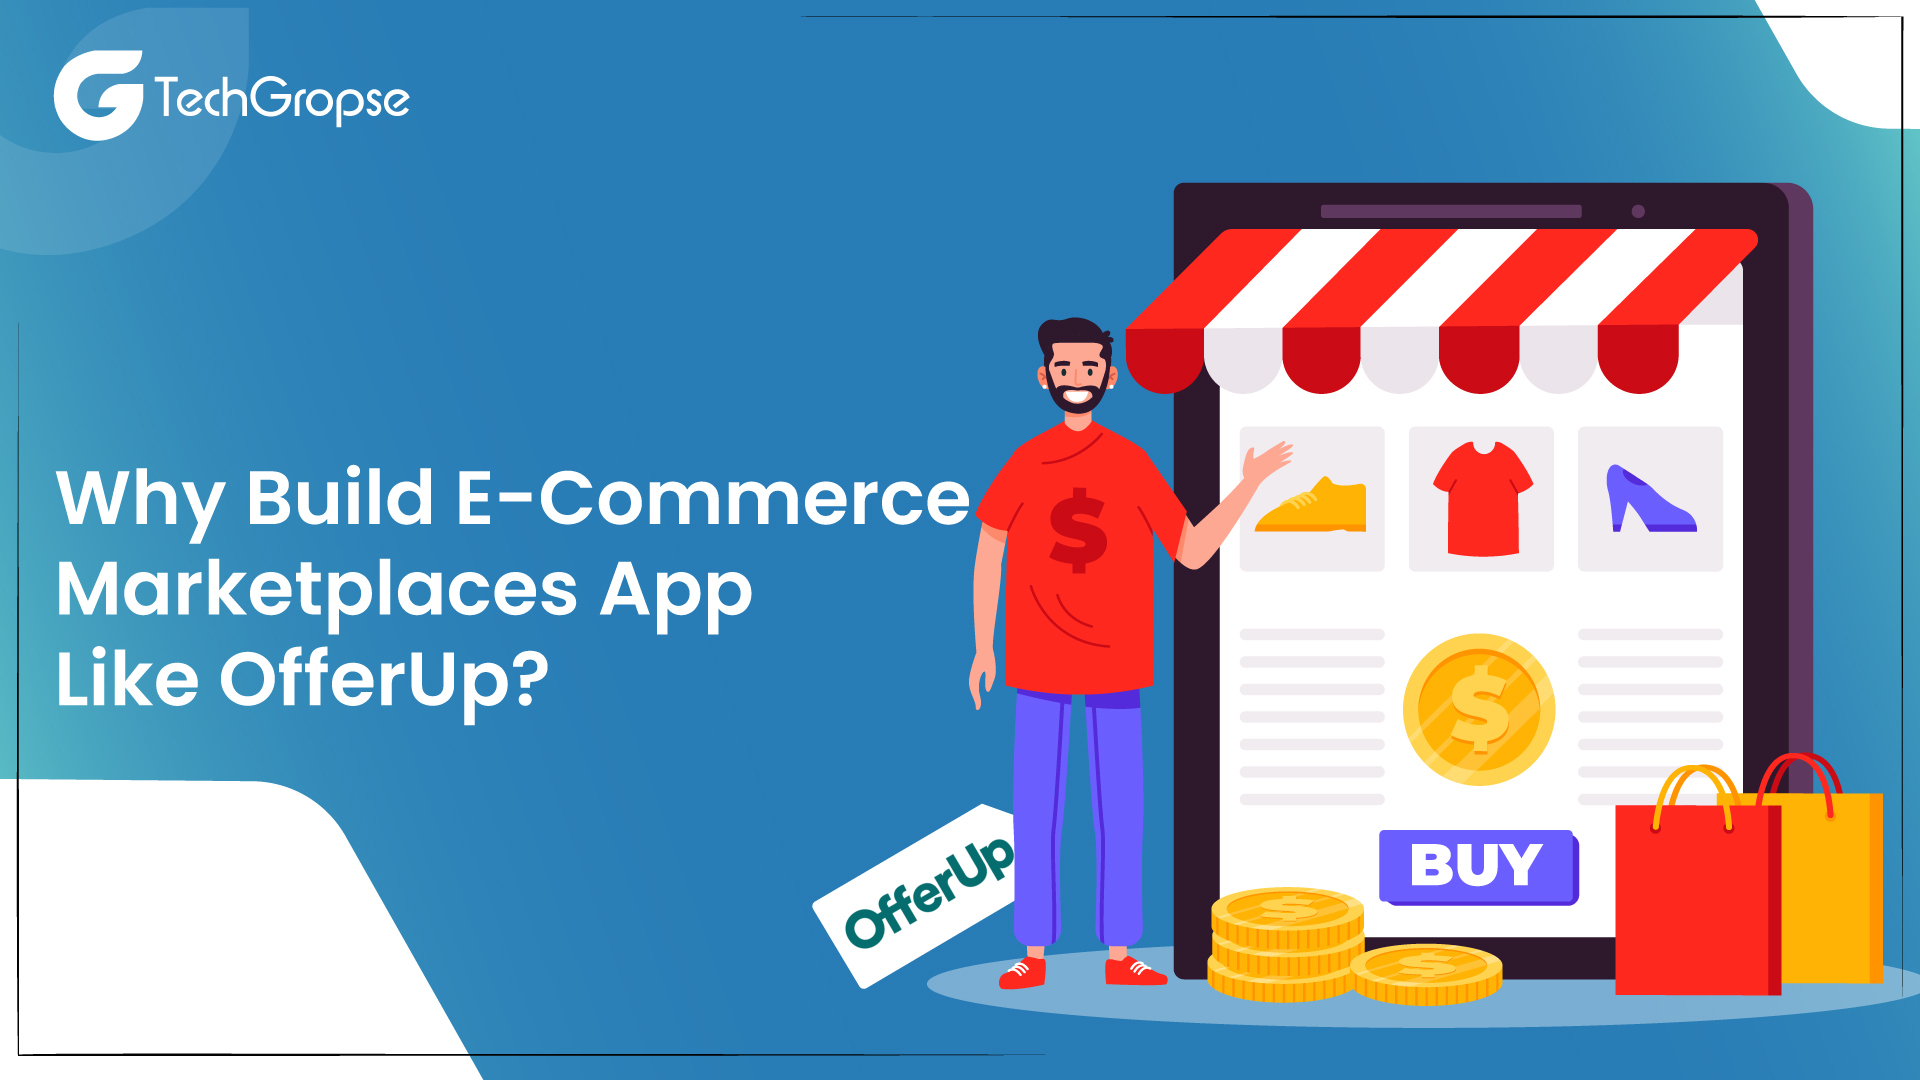 Why Build E-Commerce Marketplaces App Like OfferUp?